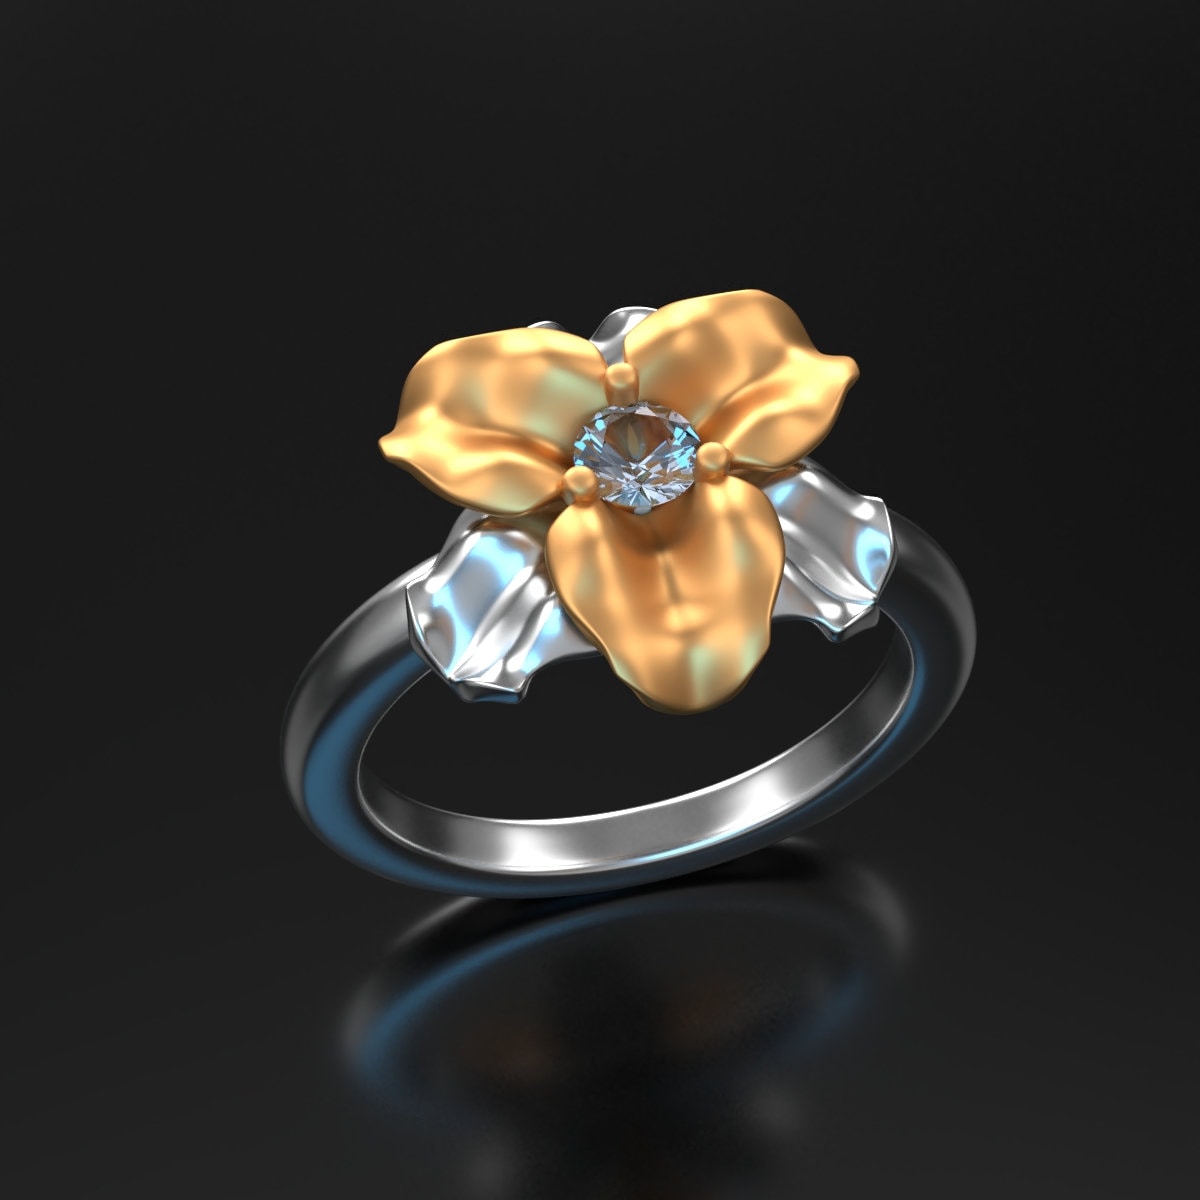 Engagement ring (VHEX4CHWA) by 3djewelry